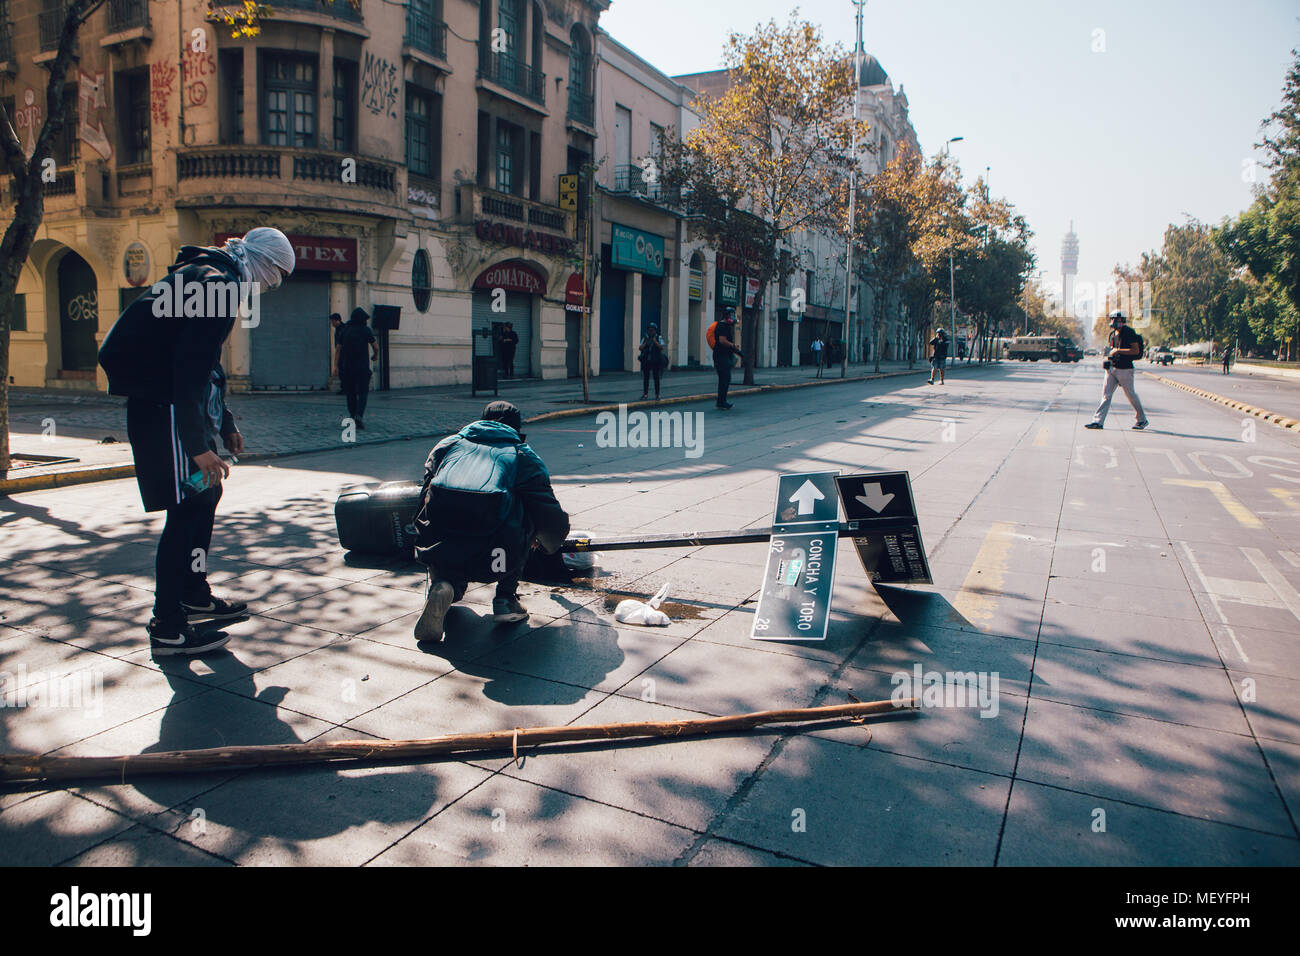 Santiago, Chile - April 19, 2018: A group of protesters causing damage on the street during a demonstration demanding an end to the Profit in the Educ Stock Photo